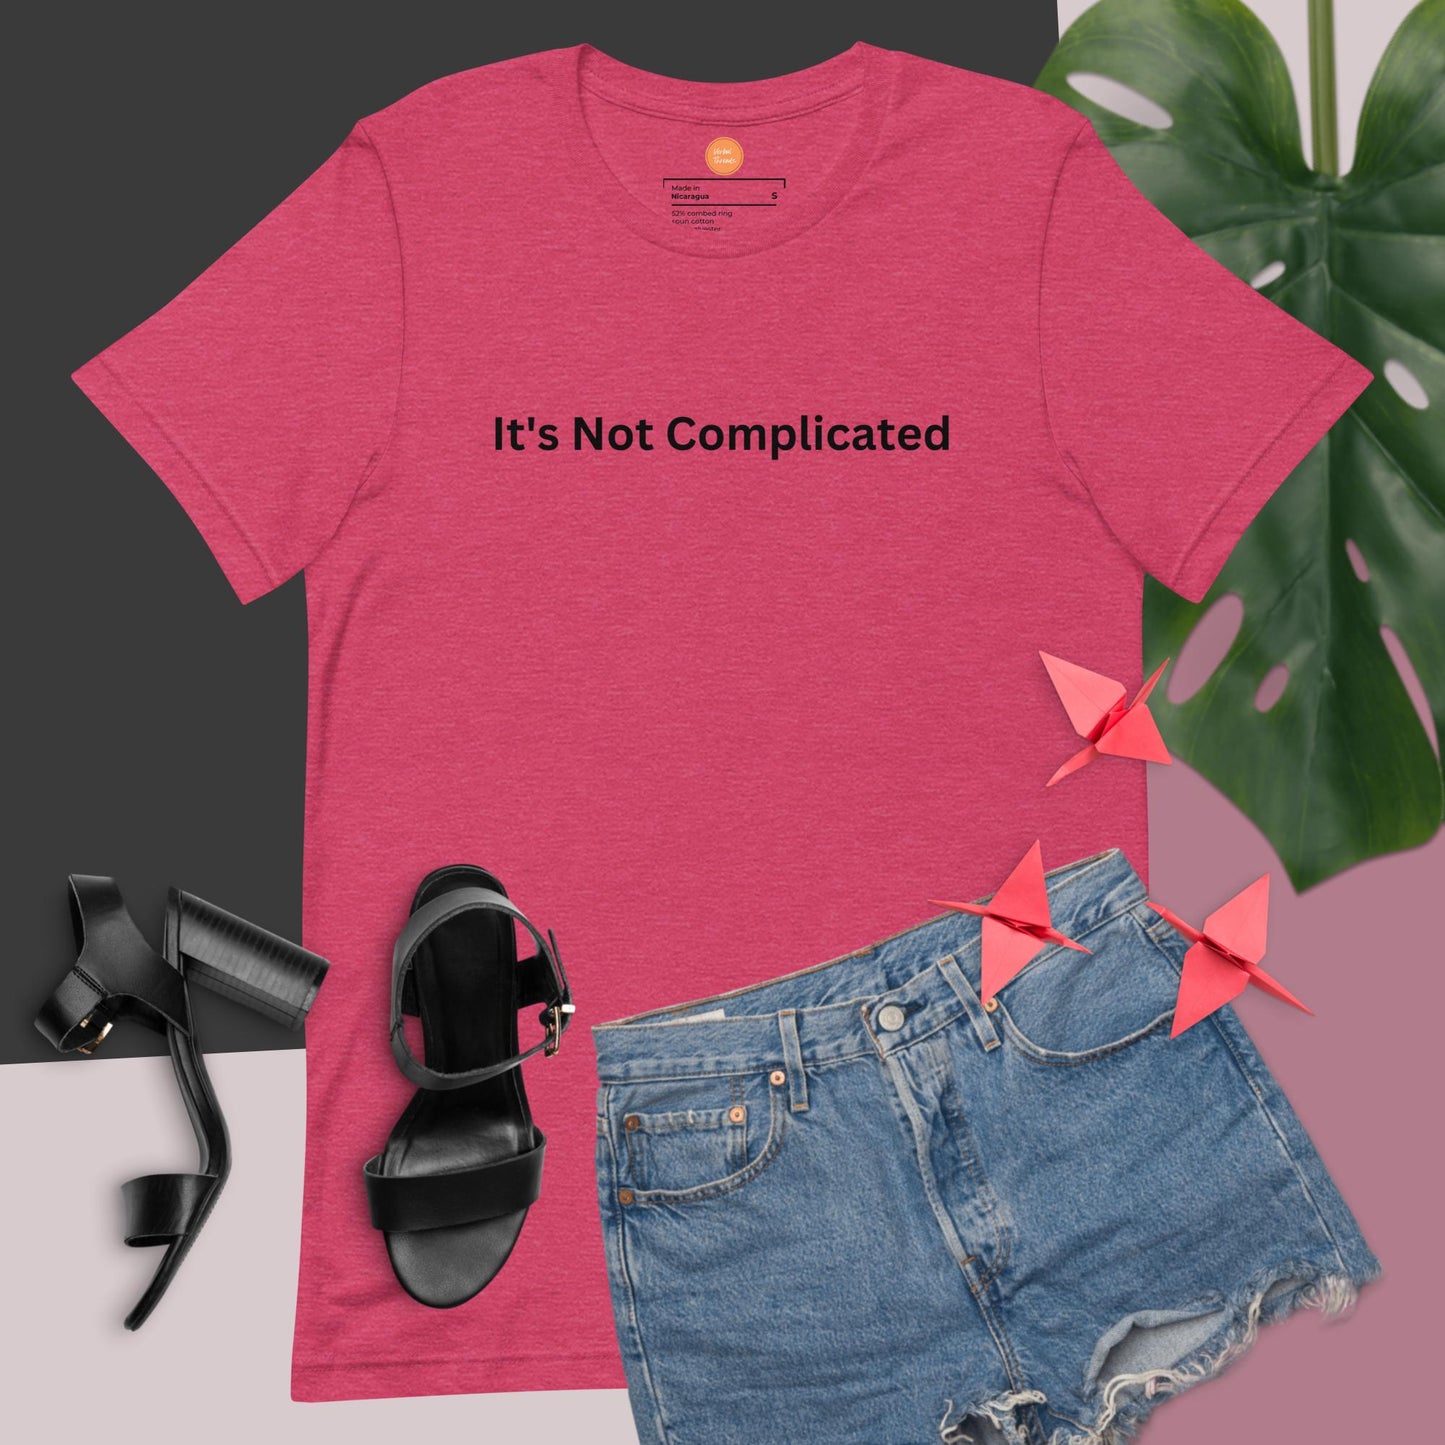 A comfortable t-shirt with a slight stretch. The unique design allows to express yourself via your clothing